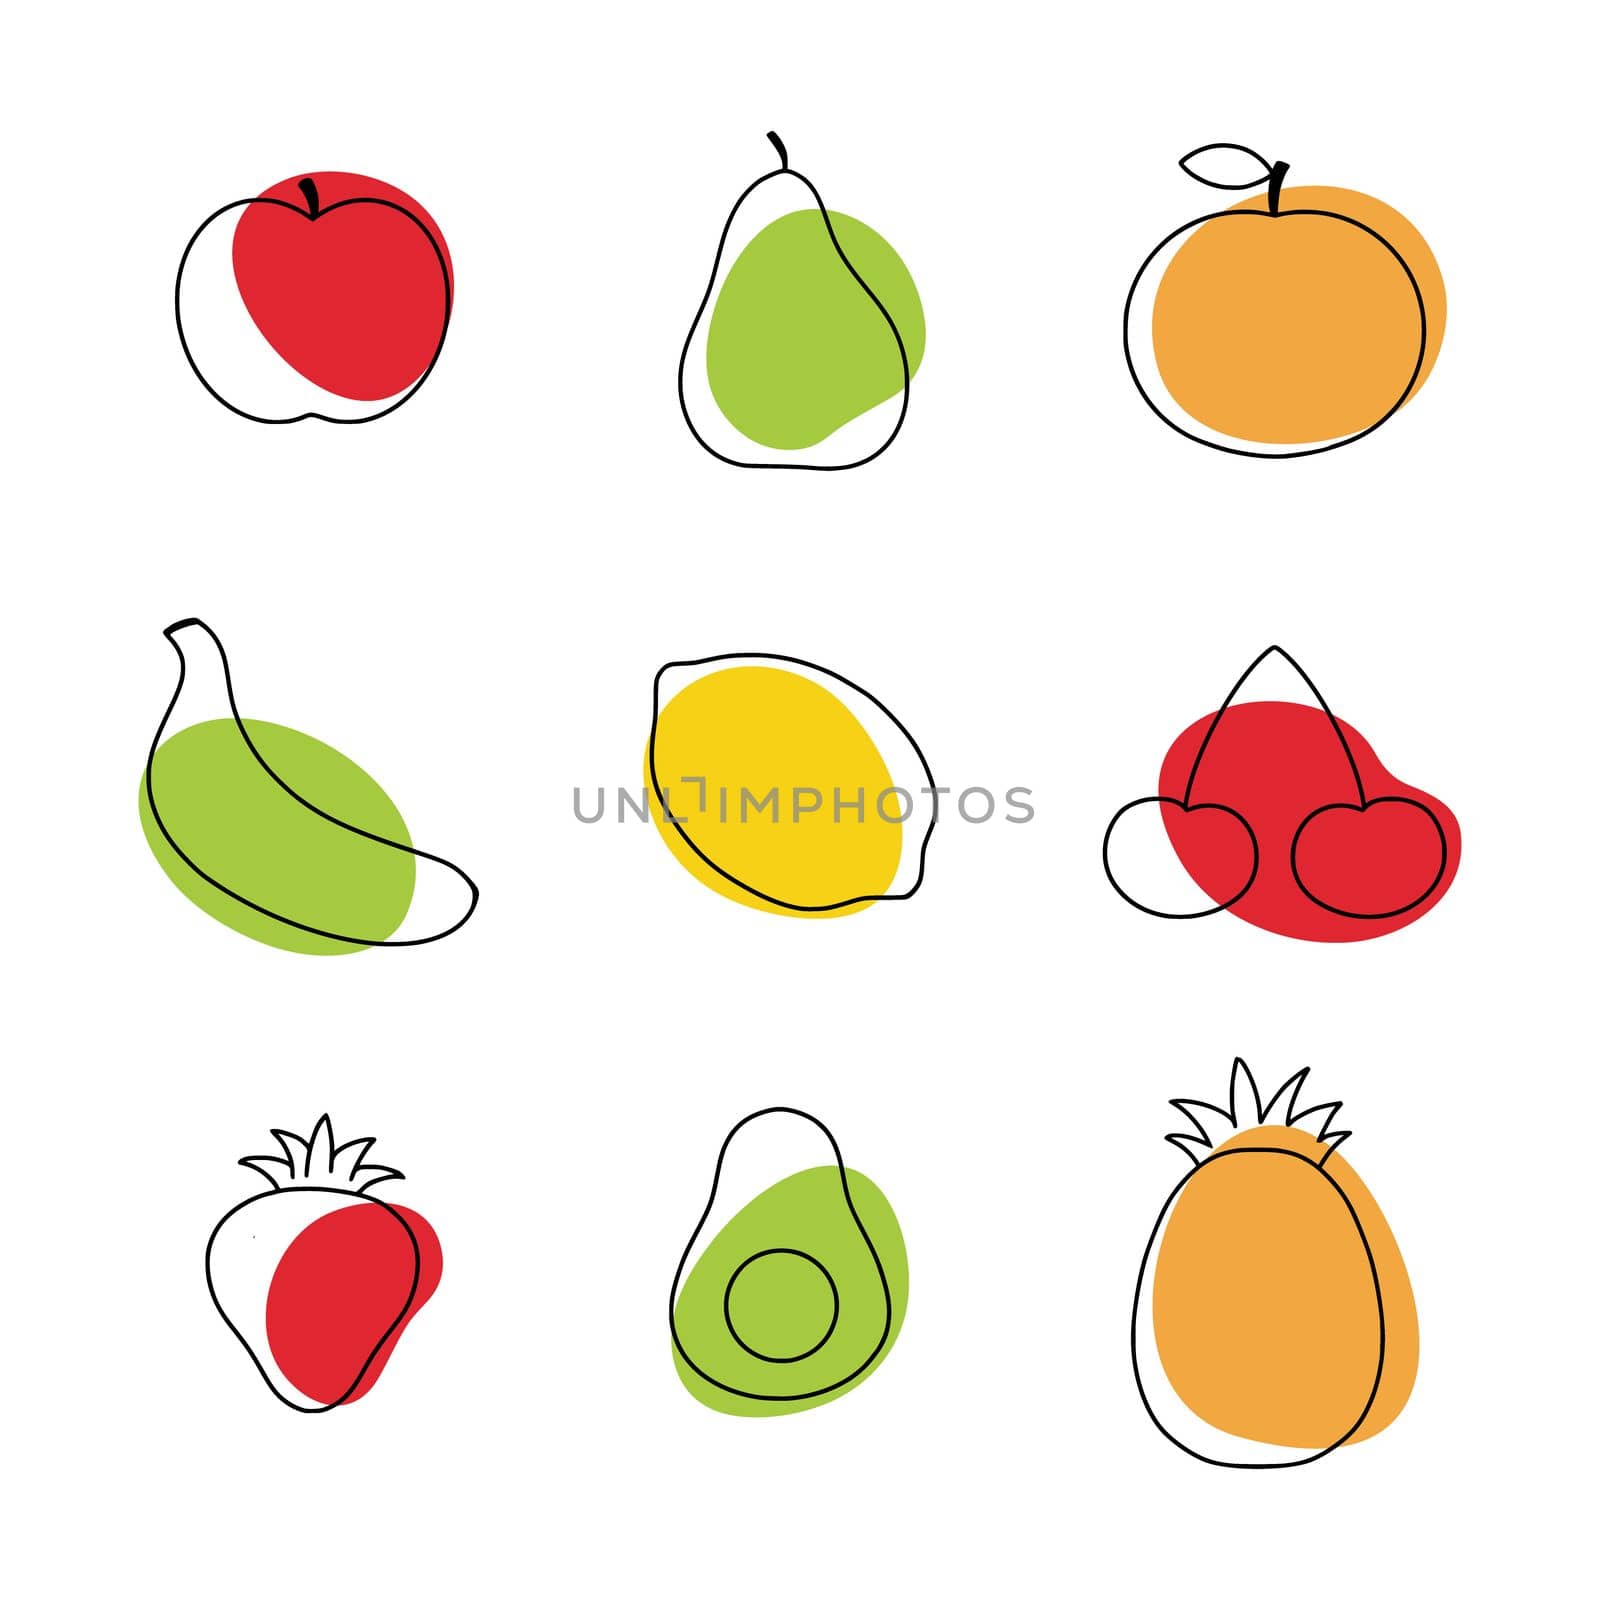 Fruit and berries in the style of doodle. A linear drawing with healthy fruits. by polinka_art